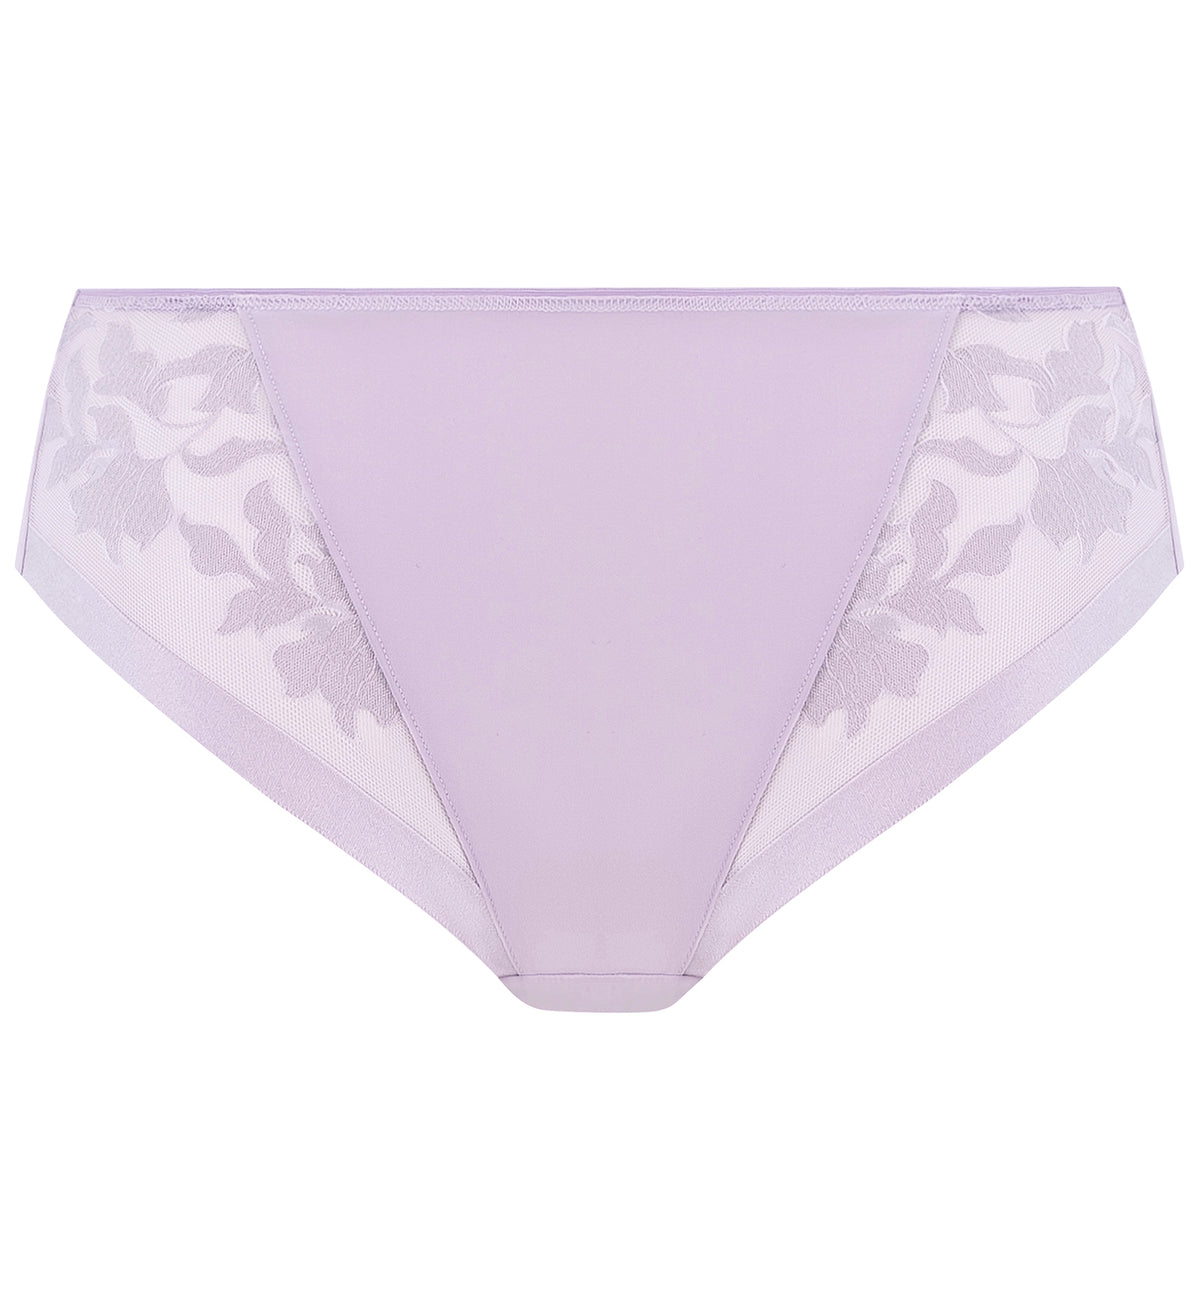 Fantasie Illusion Brief (2985),Small,Orchid - Orchid,Small